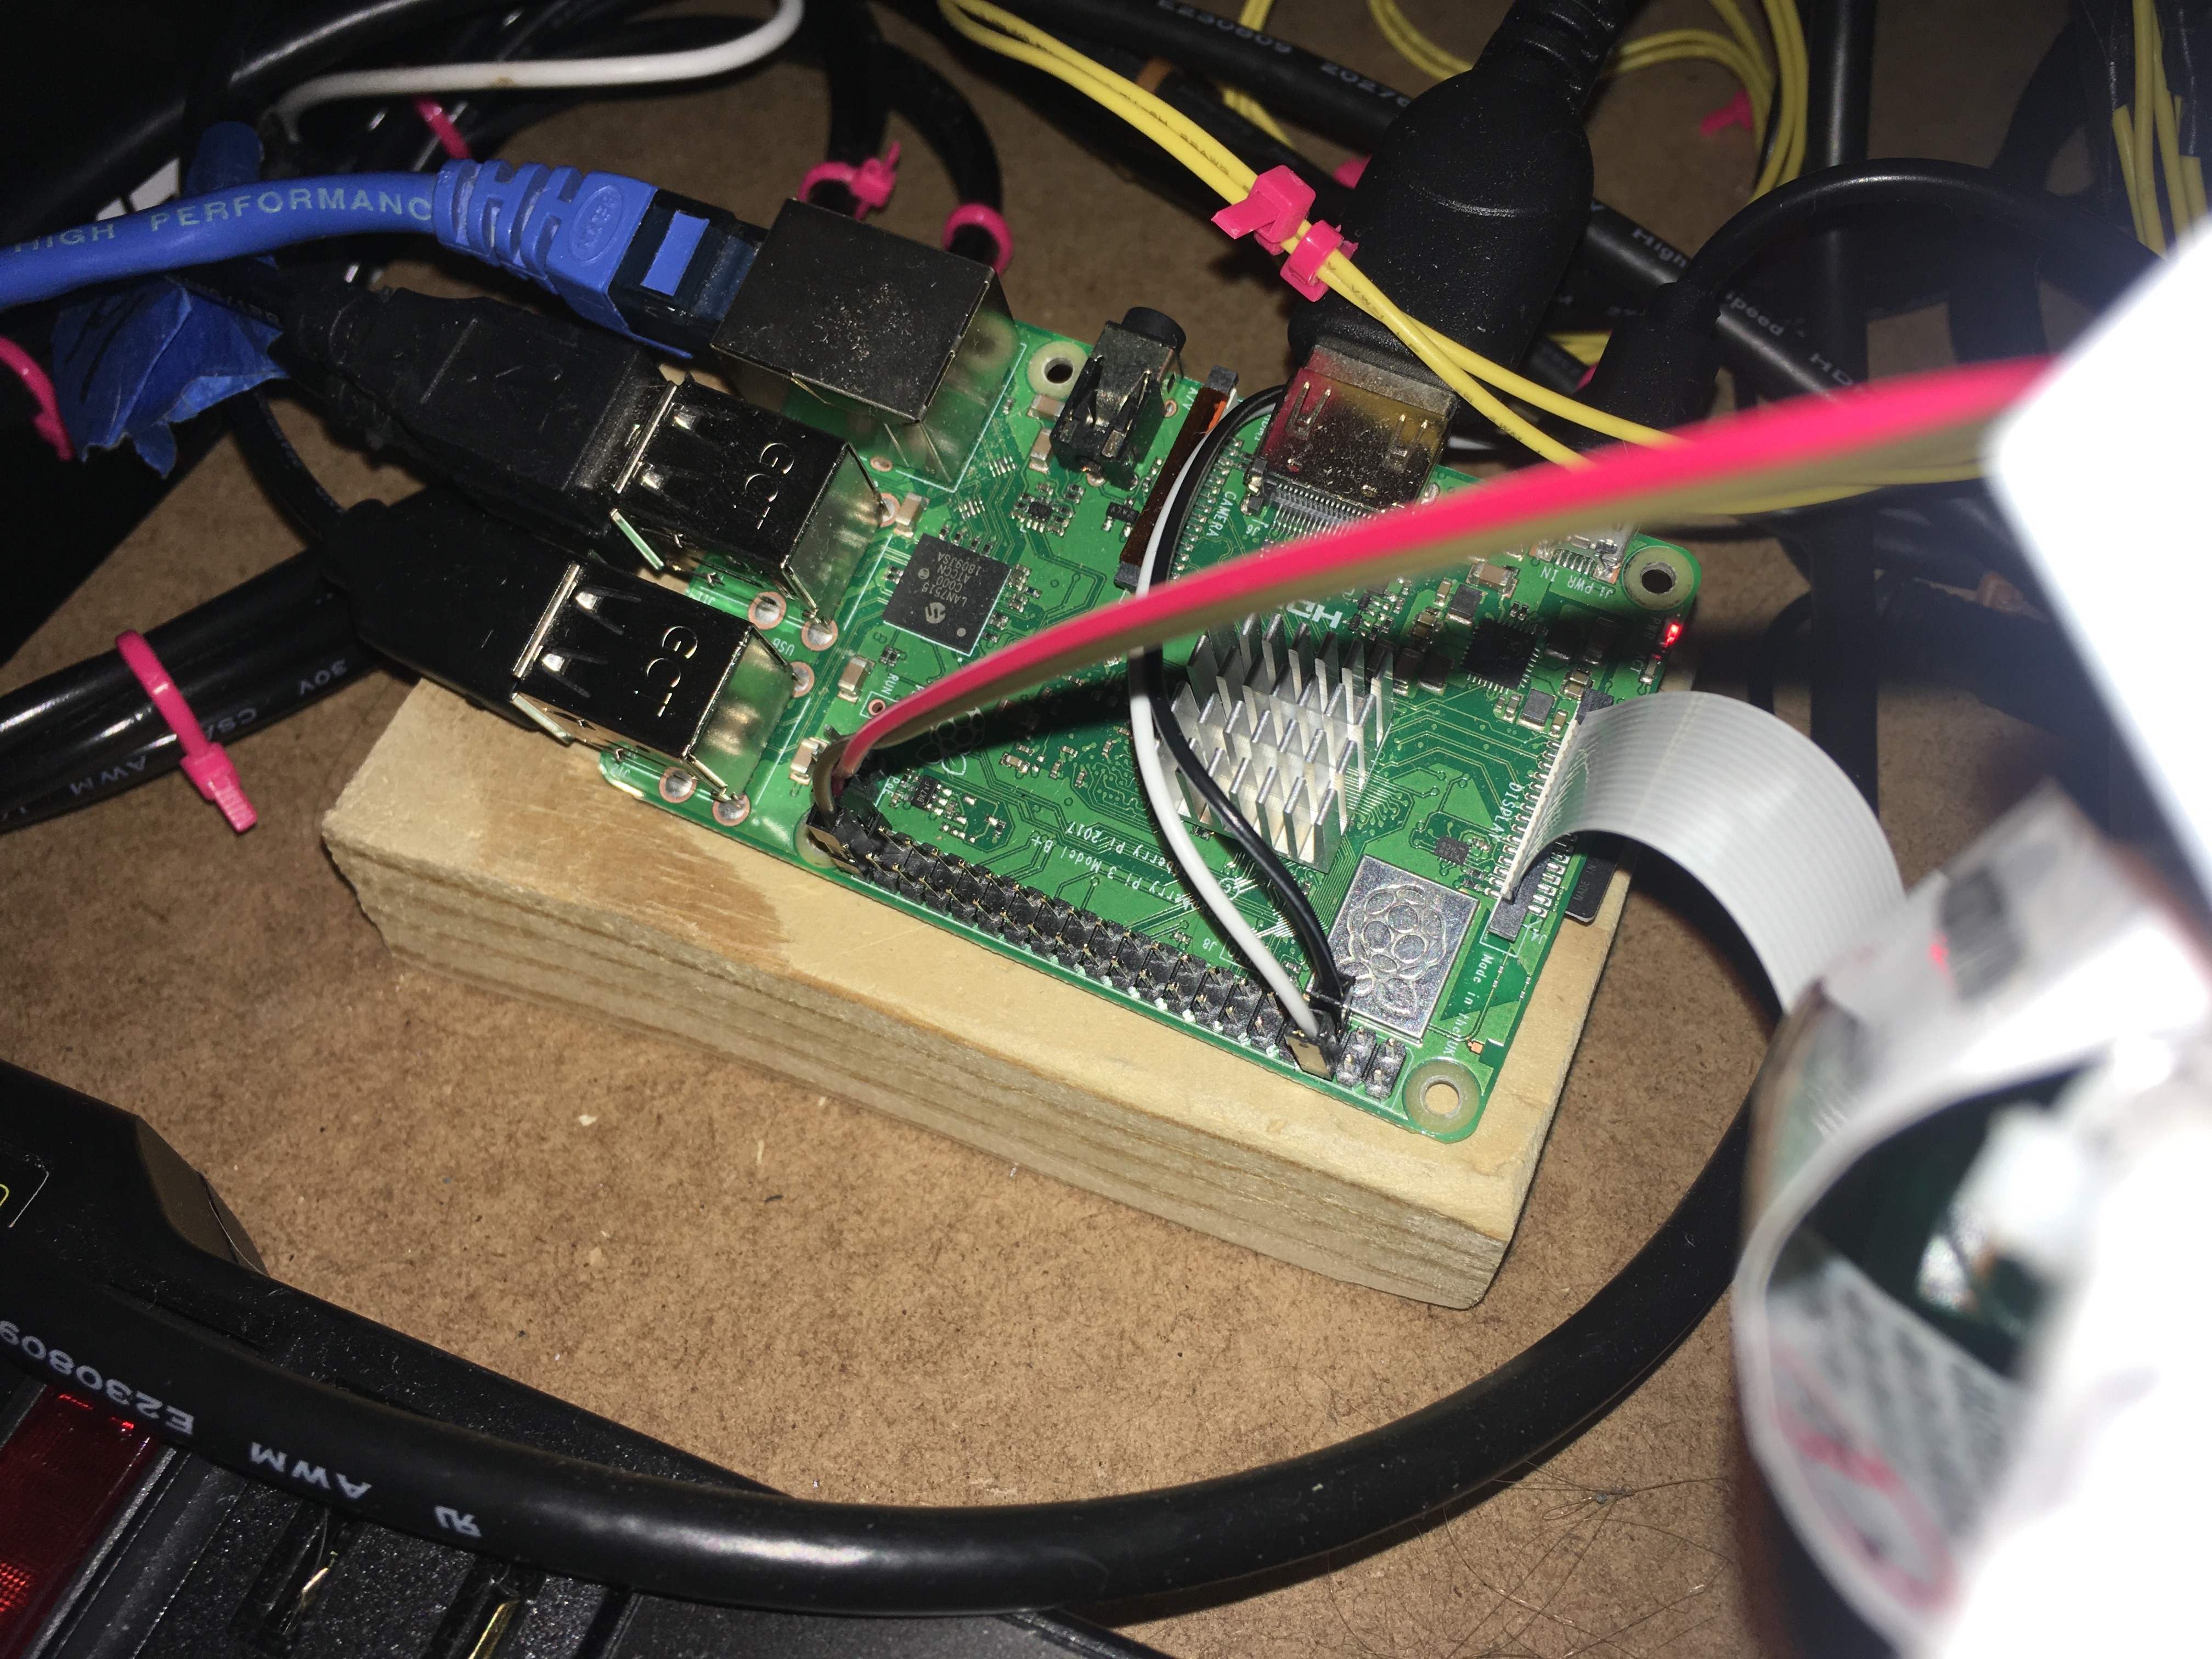 the wired connected to GPIO pins